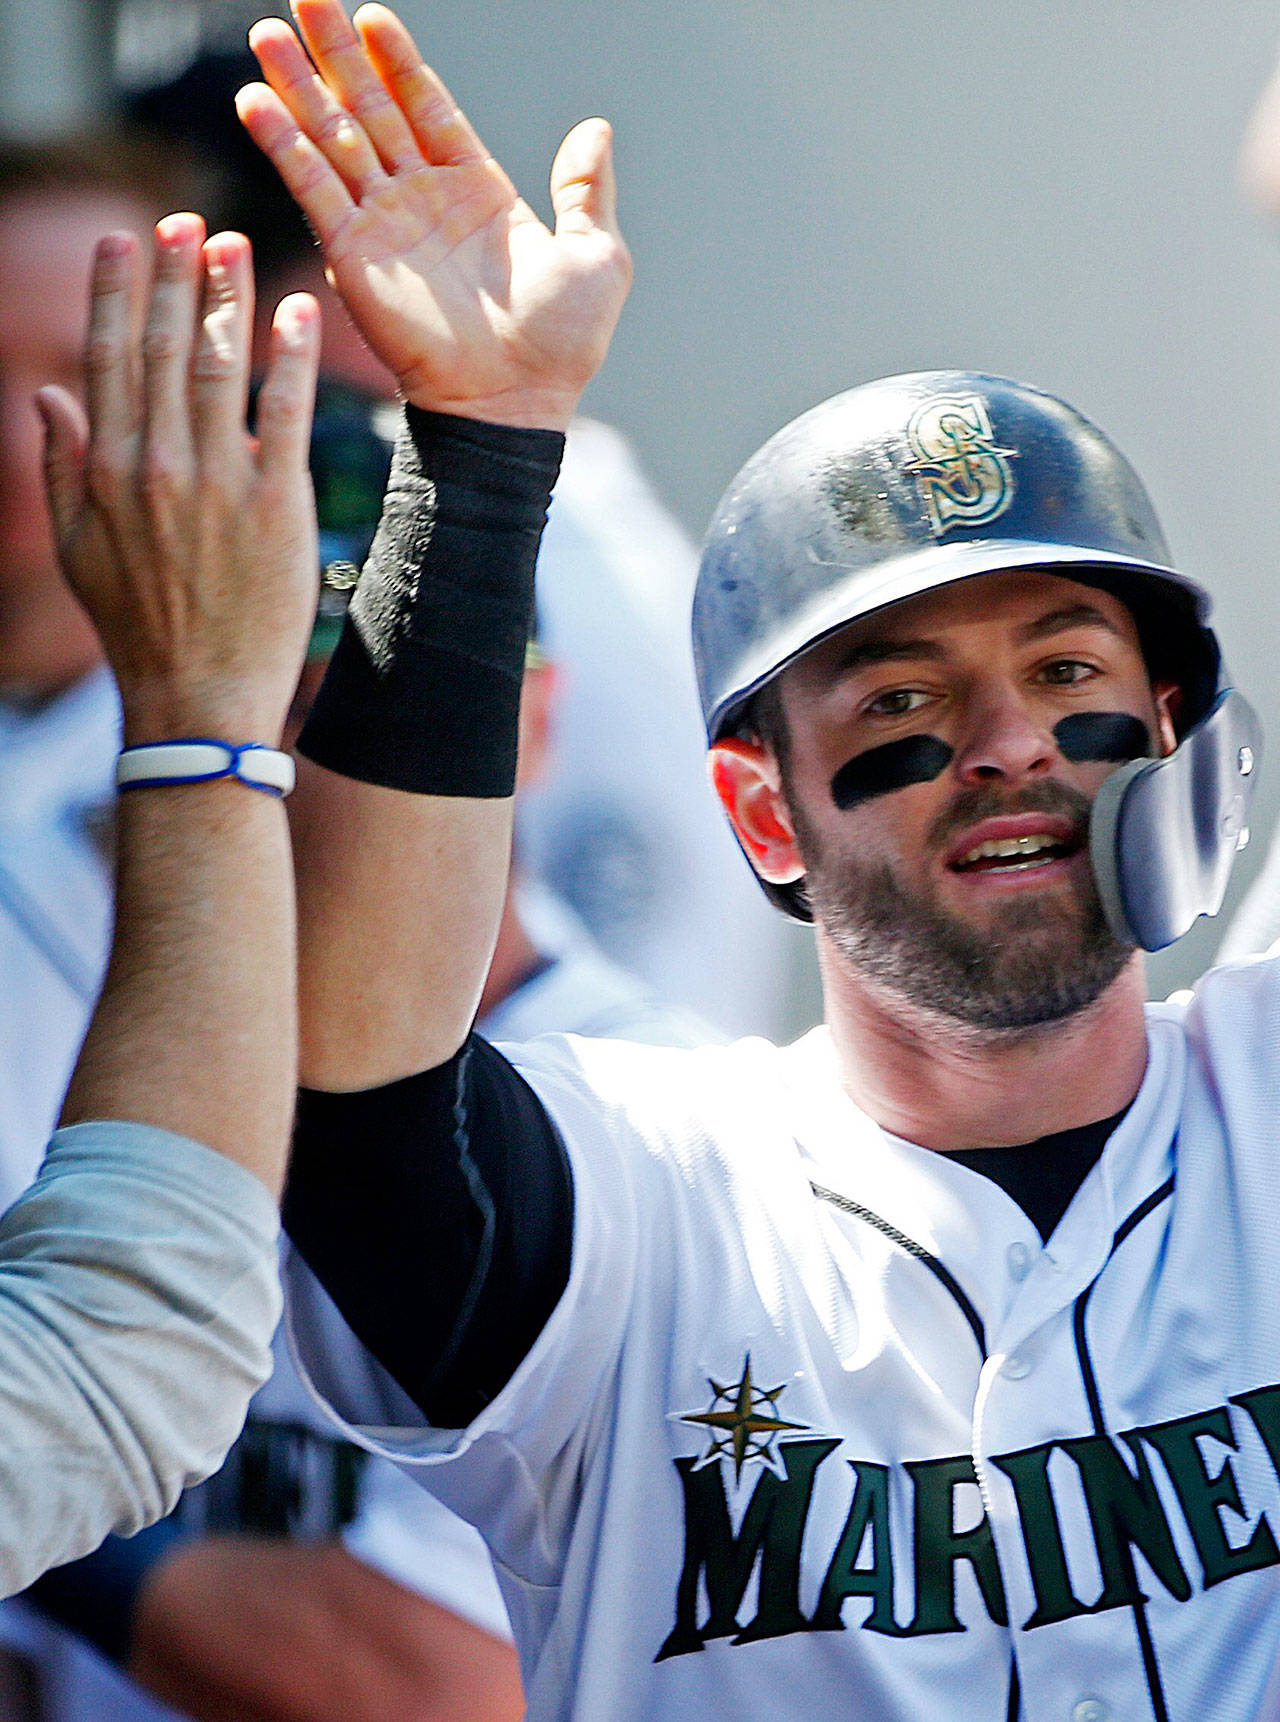 Mariners right fielder Mitch Haniger celebrates in the dugout after scoring the go-ahead run off a Kyle Seager single in the sixth inning against Texas, Monday, May 28, 2018 at Safeco Field in Seattle. The Mariners won, 2-1. (Ken Lambert/Seattle Times/TNS)